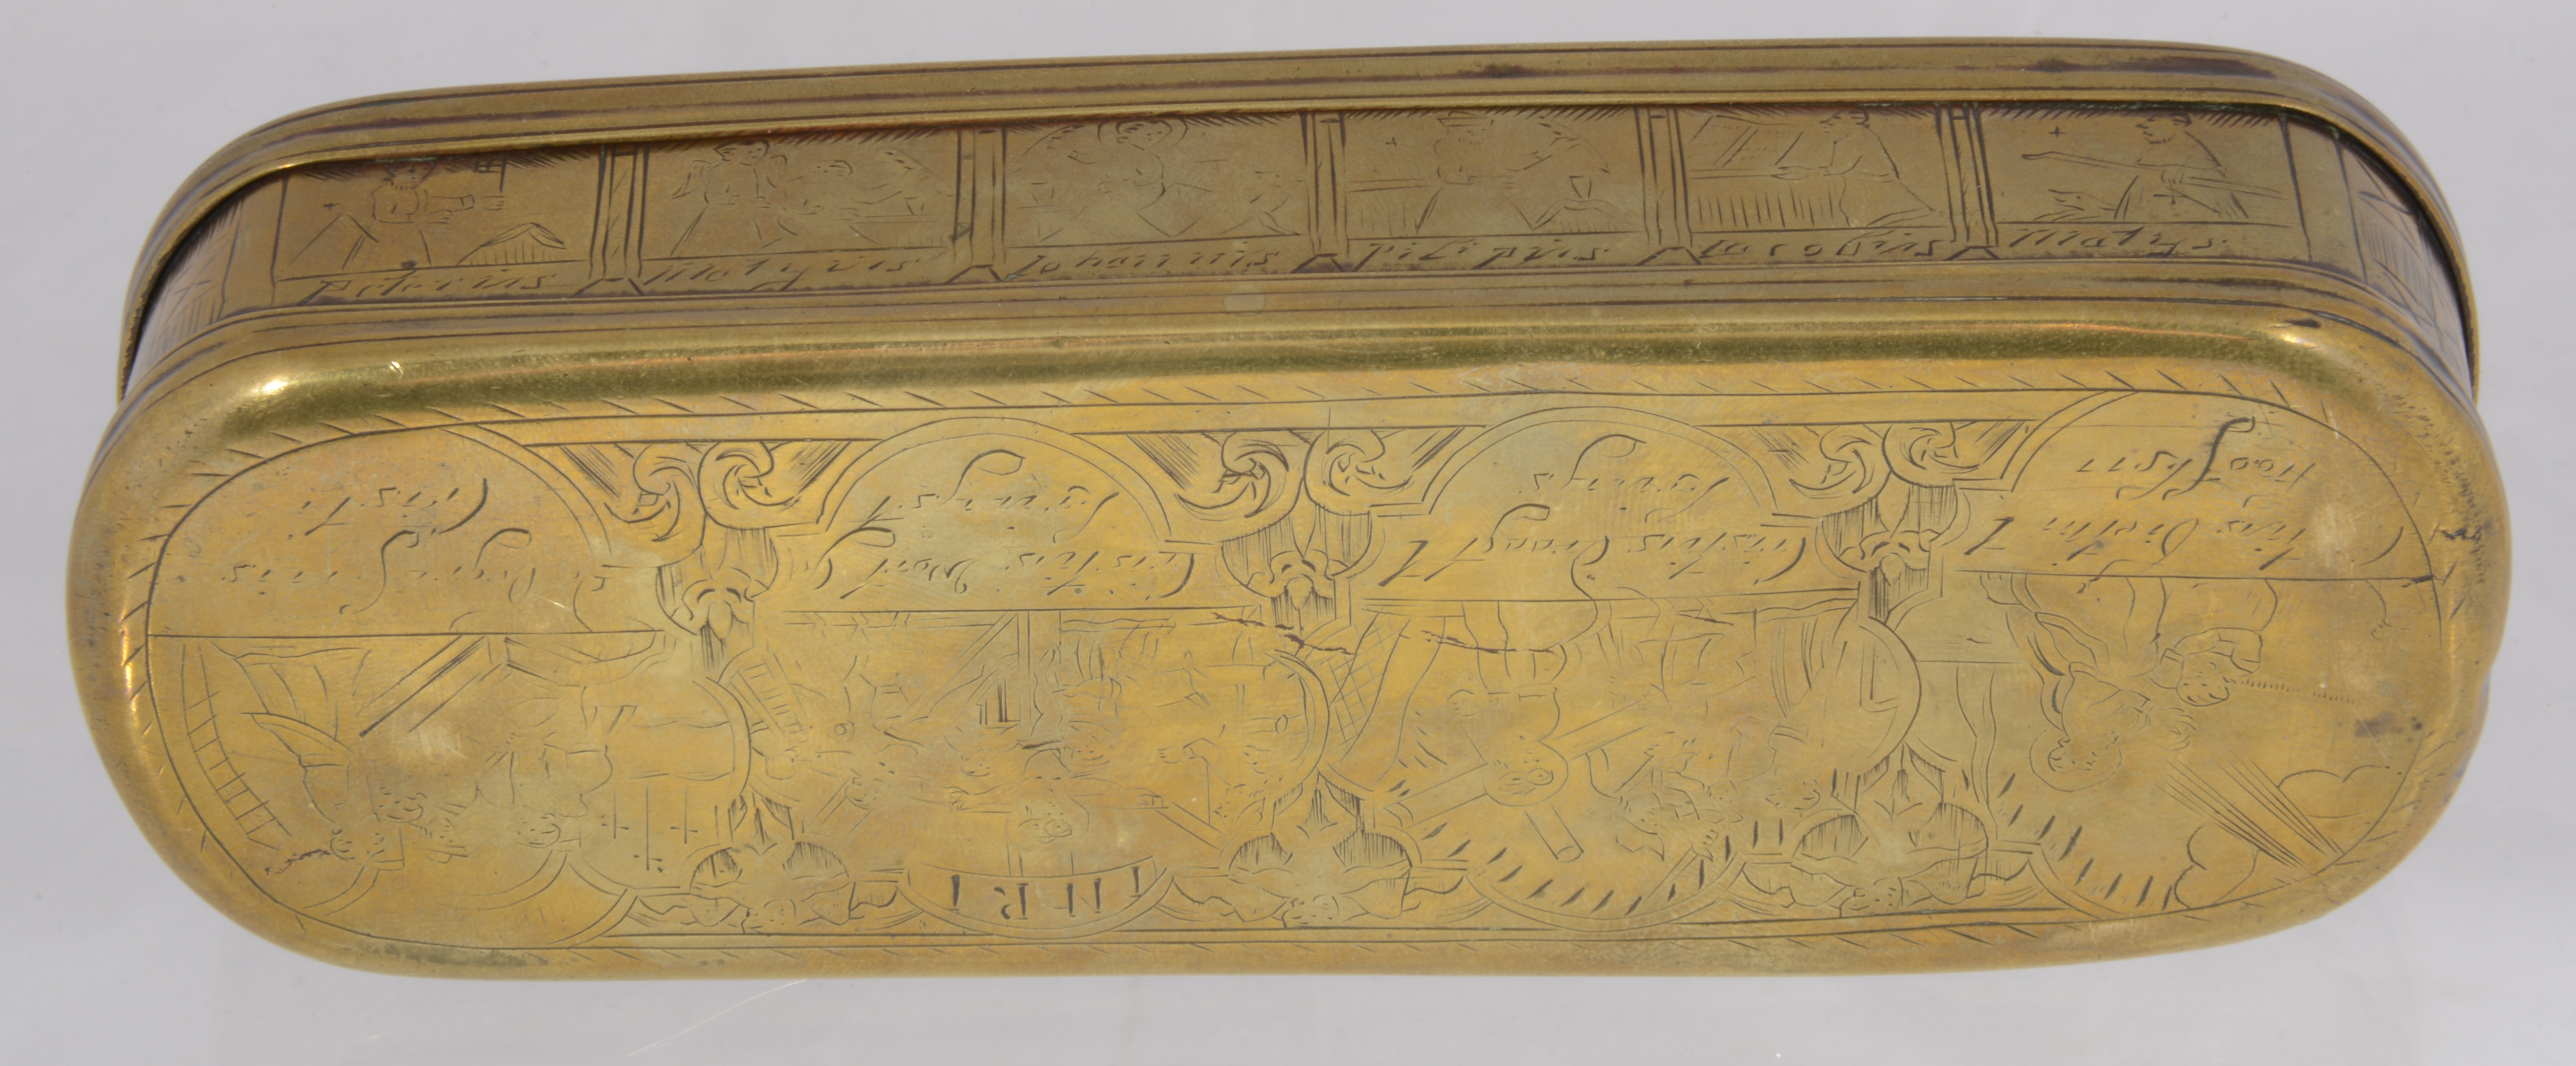 An 18th century brass tobacco box - Image 3 of 3